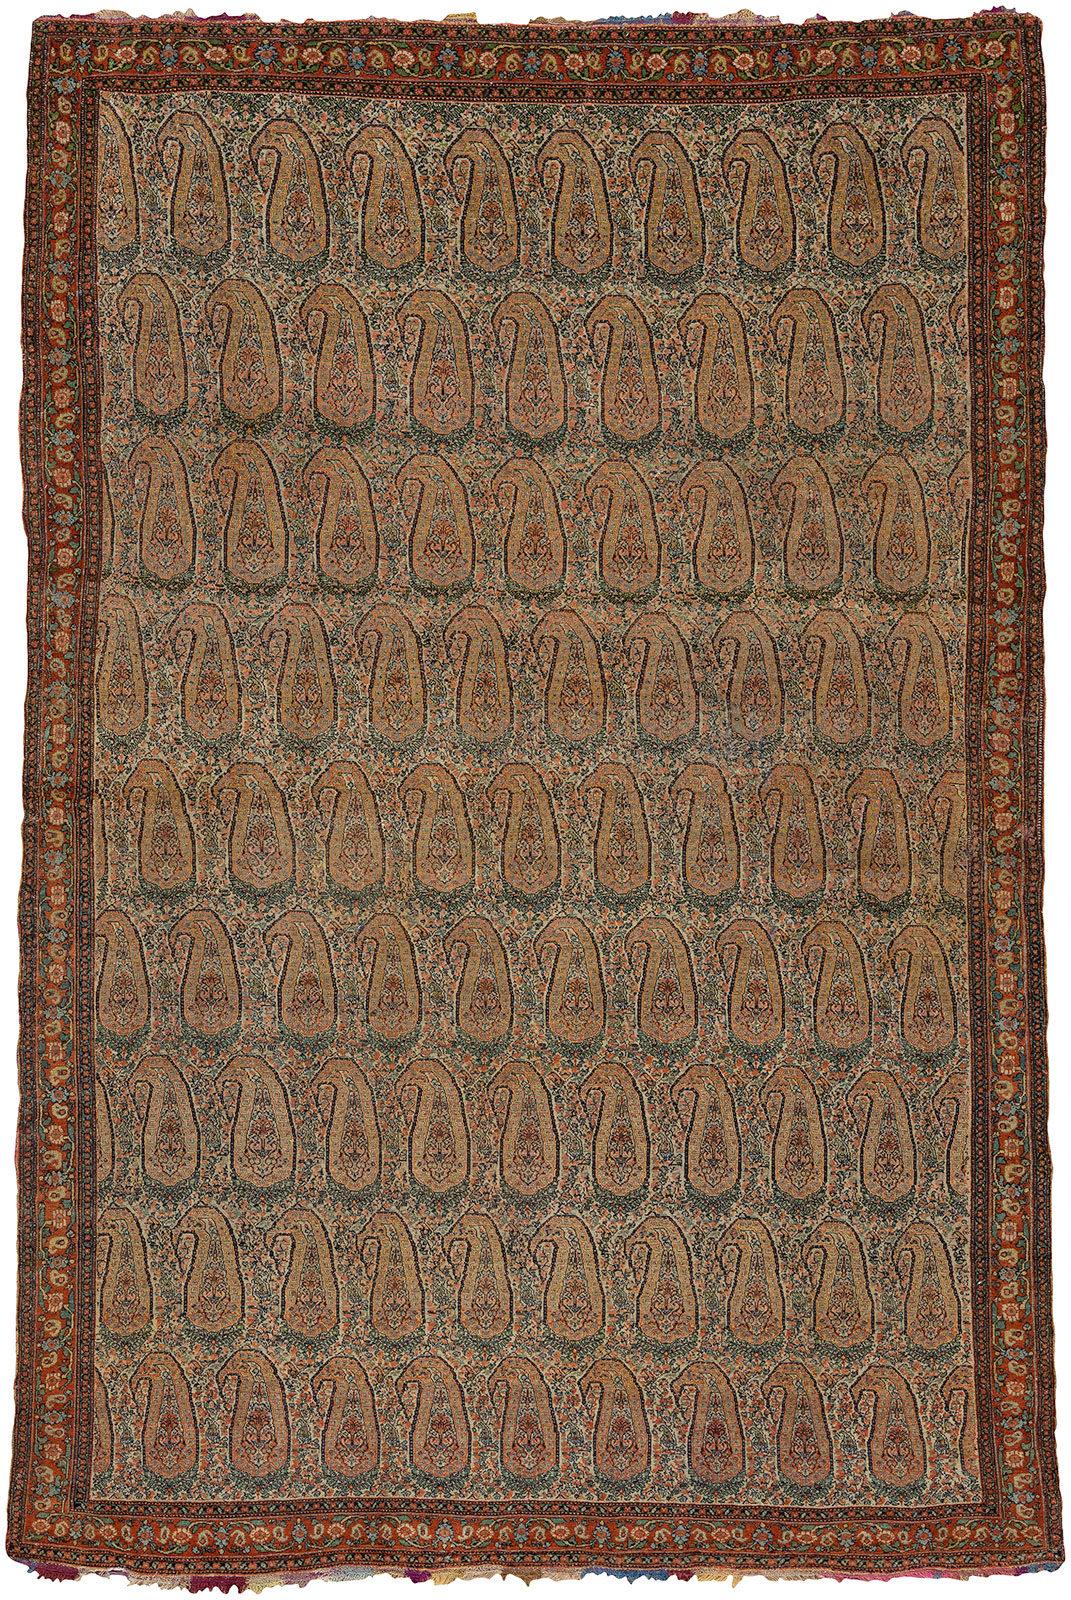 Spectacular collector level finely woven 19th century Persian Senneh rug featuring a large scale paisley design. The weaver added a multicolored fringe that we have never seen.

4'3'' x 6'5''

Antique Senneh rugs are one of the most distinctive